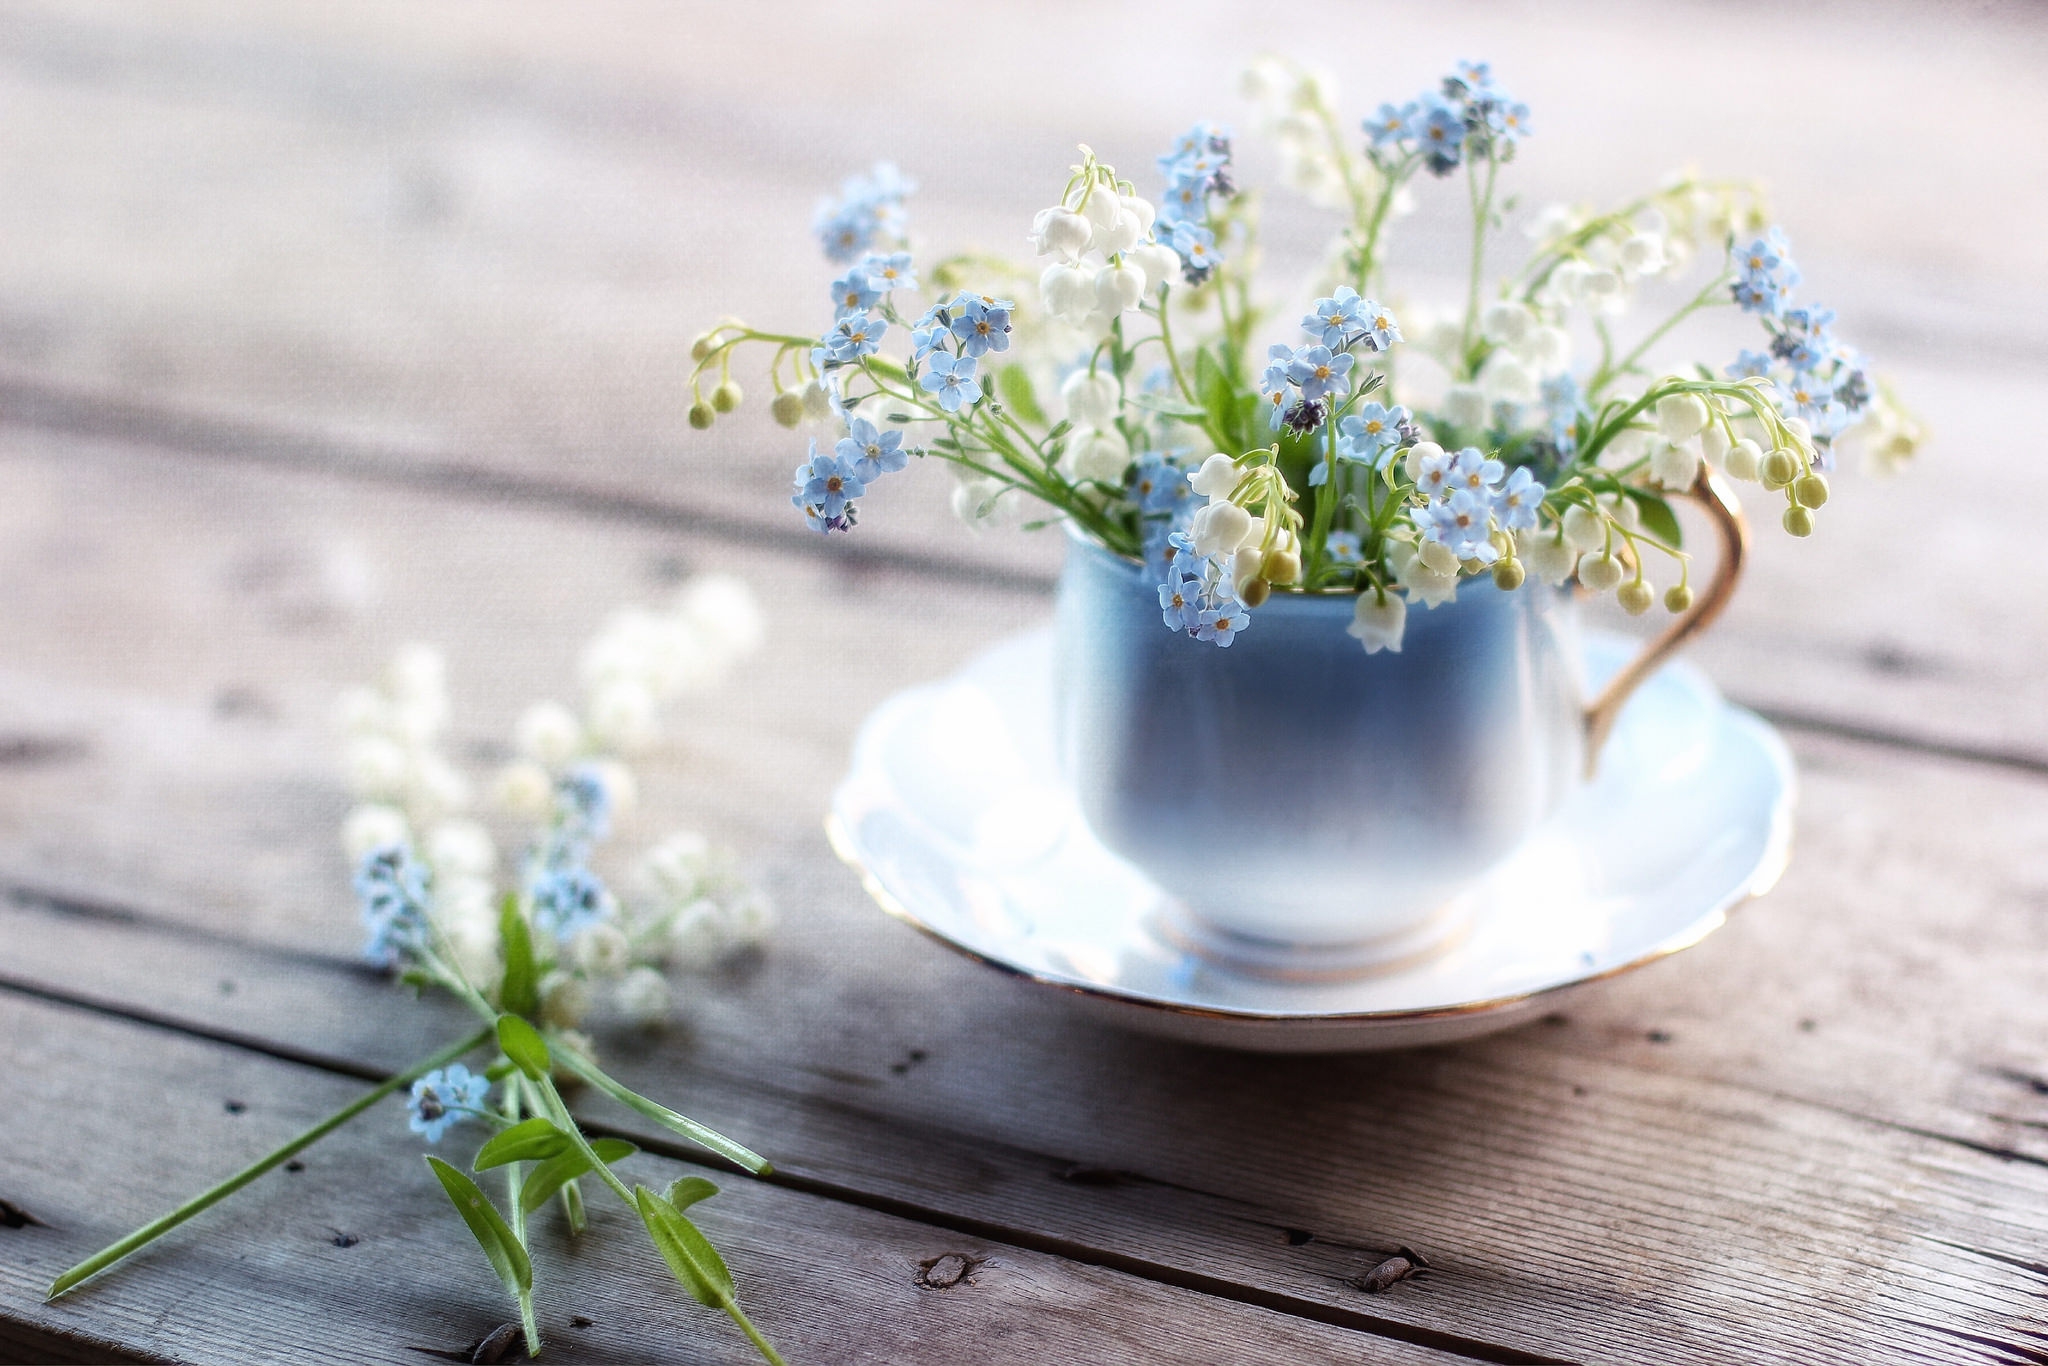 Wallpaper - Forget Me Not And Lily Of The Valley - HD Wallpaper 